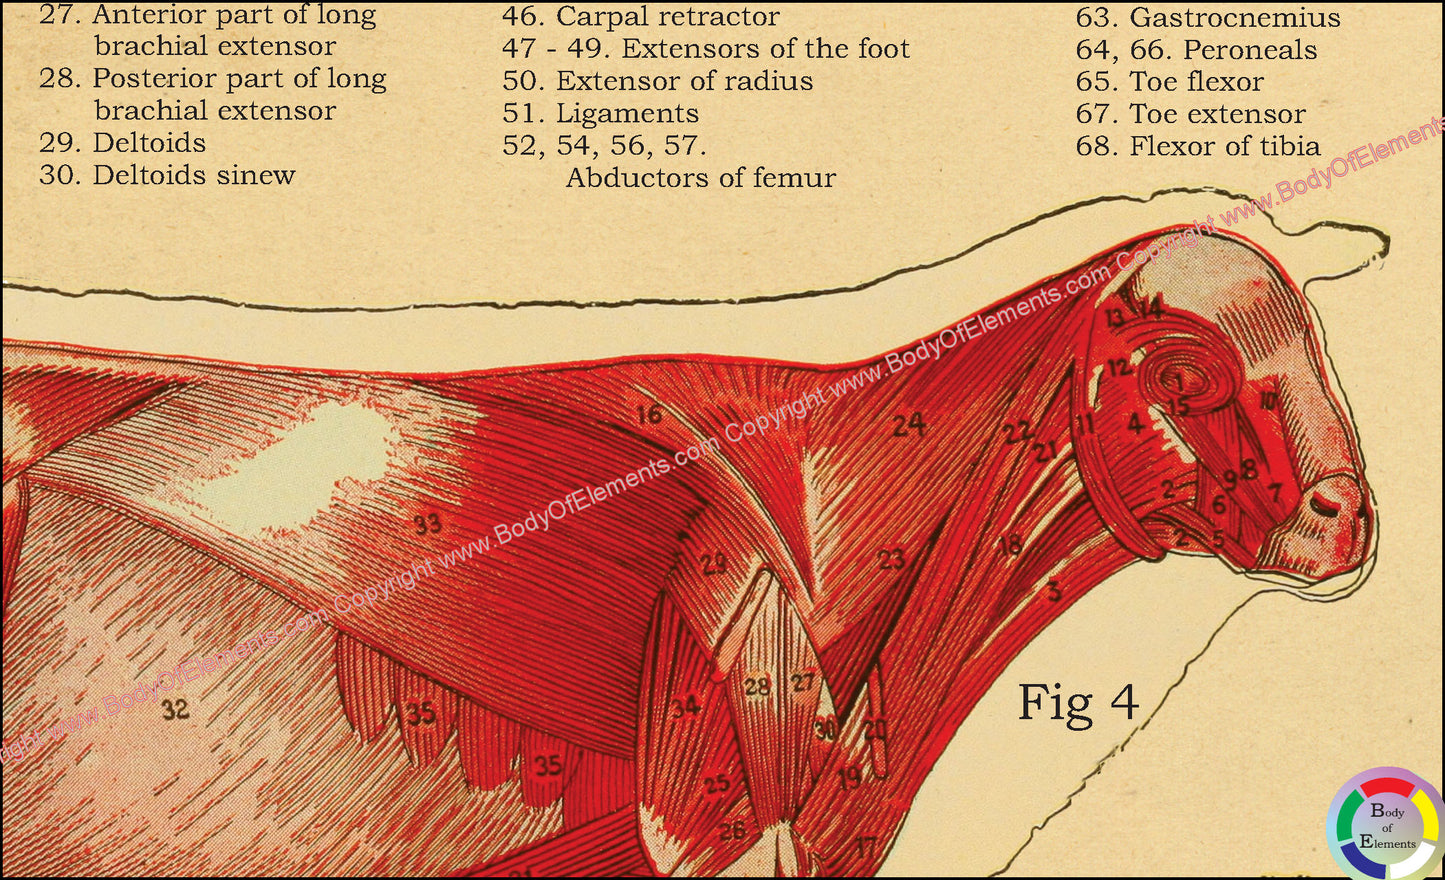 Muscle anatomy of the sheep.